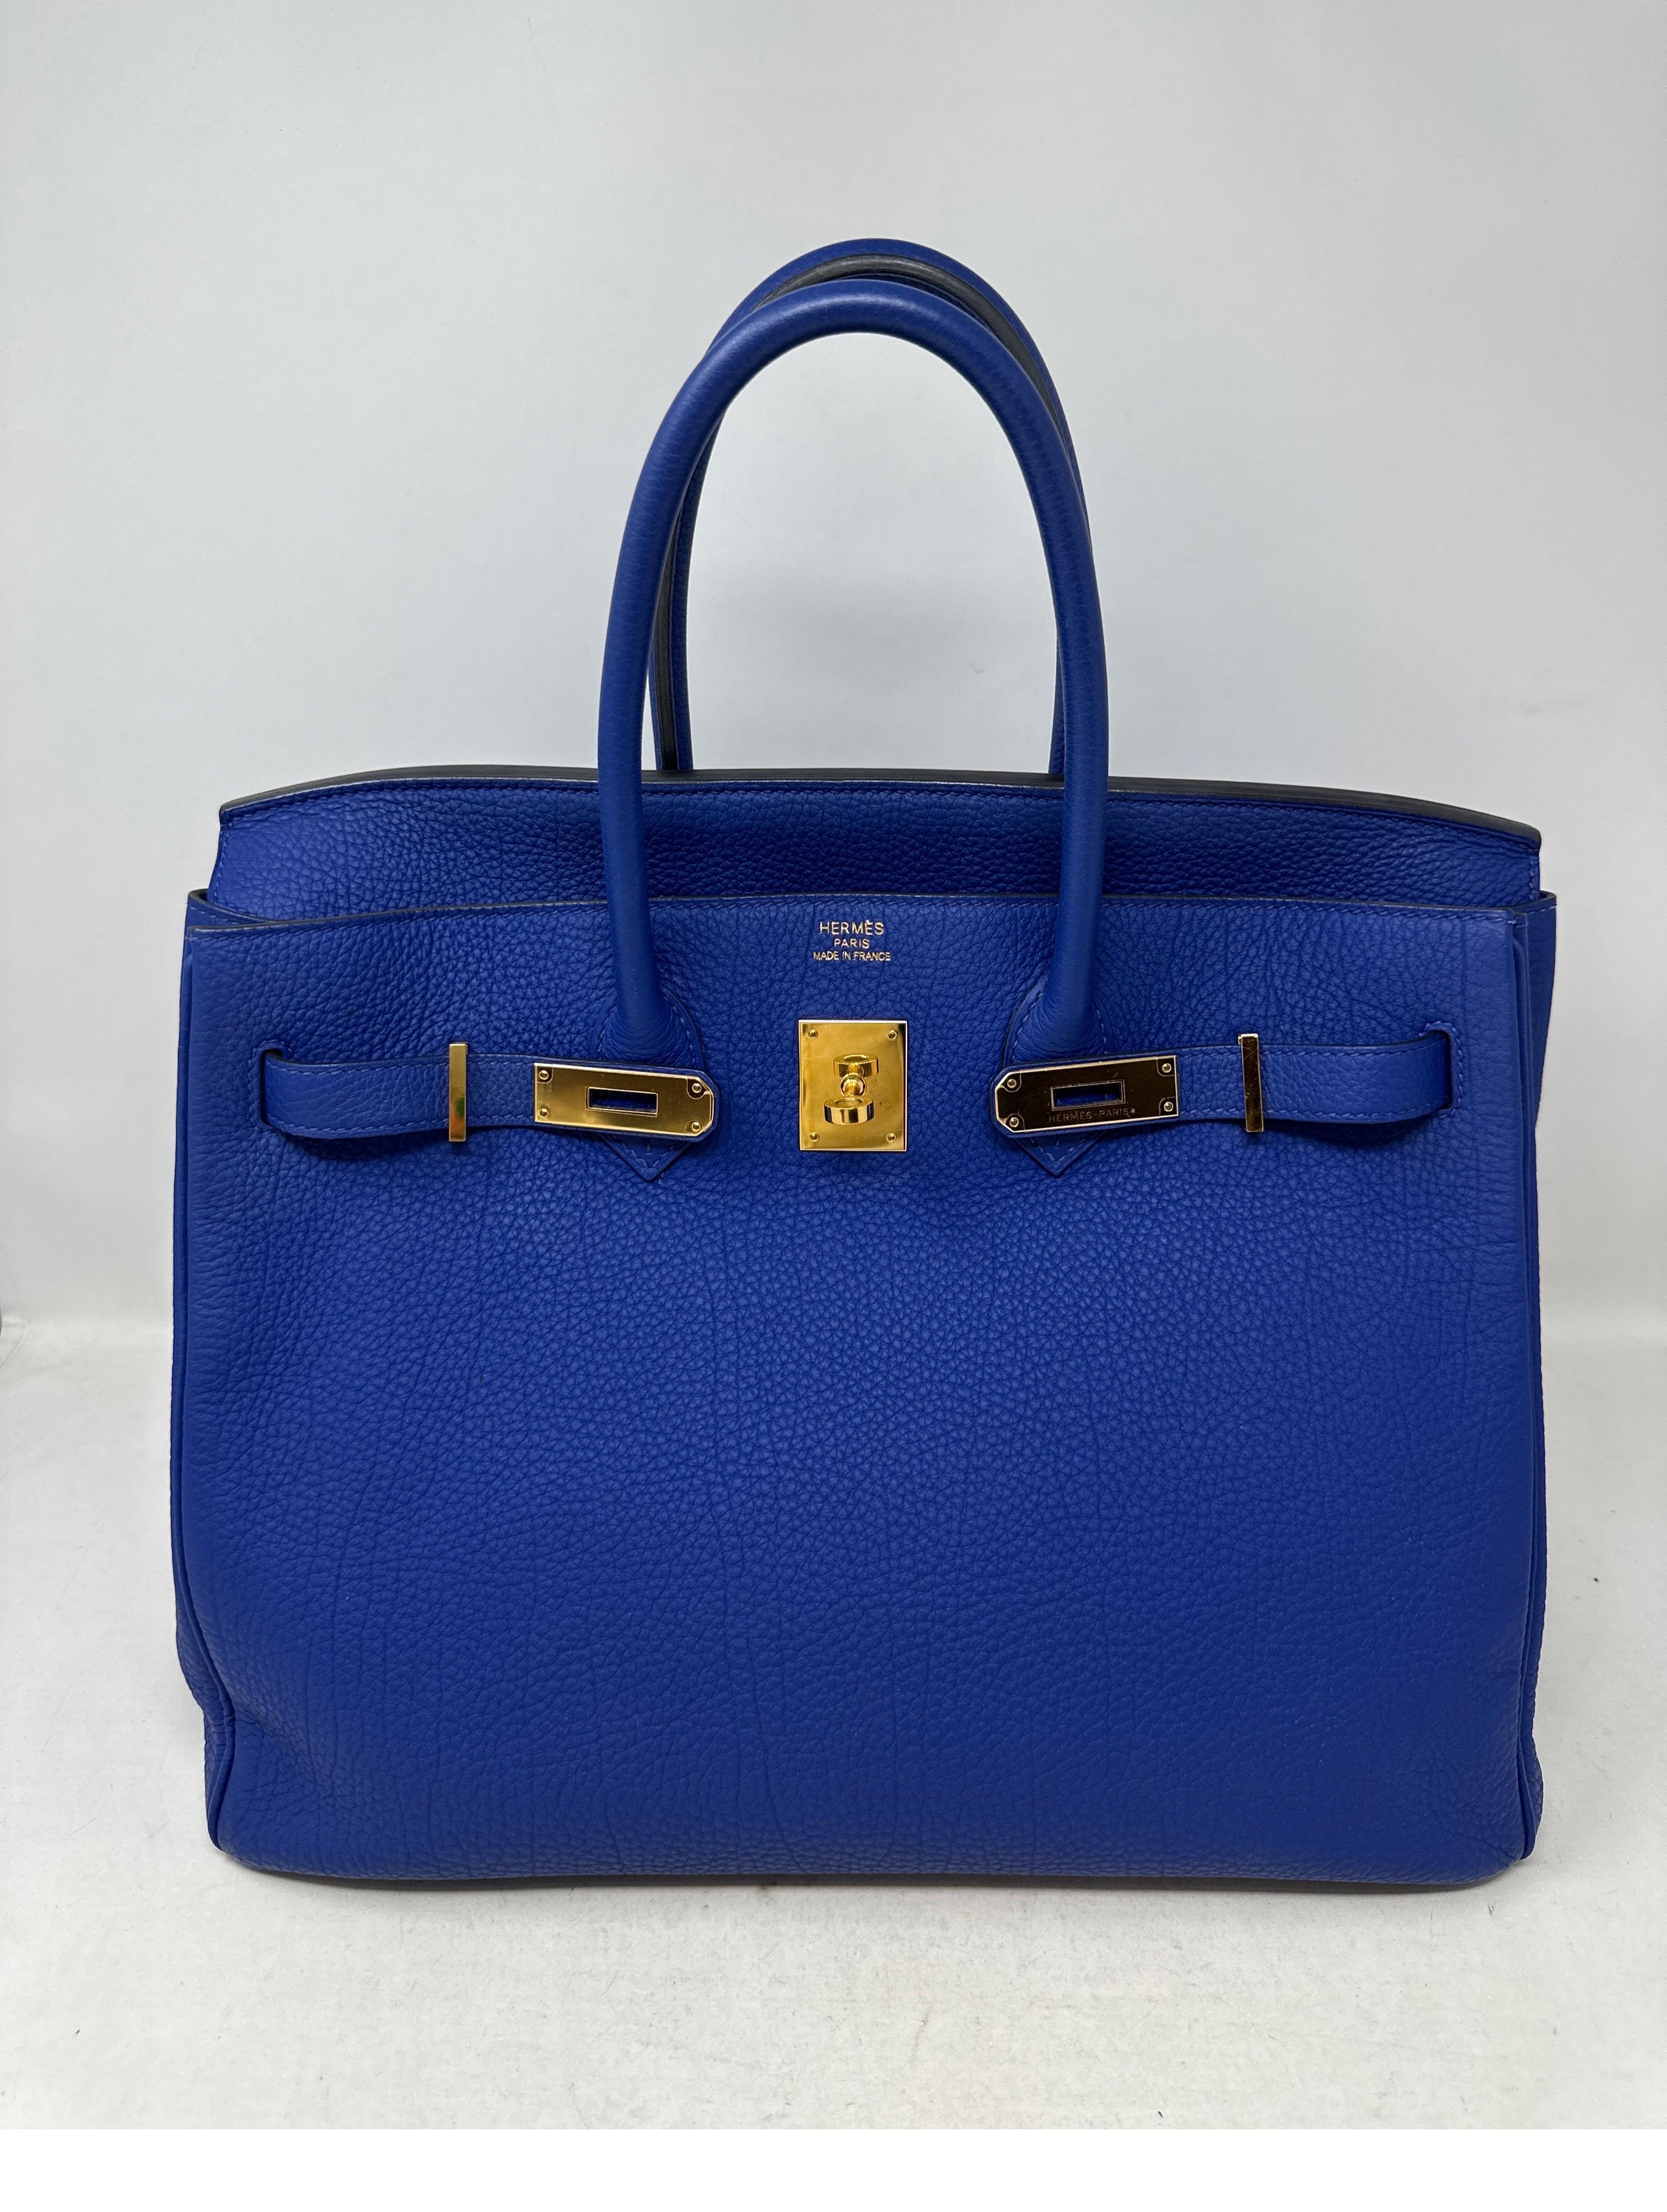 Hermes Blue Electrique Birkin 30 Bag. Excellent like new condition. Gold hardware. Interior clean. Most wanted size 30 Birkin. Rare and vibrant blue color. Togo leather. Invest in the best bag. Includes clochette, lock, keys, and dust bag.